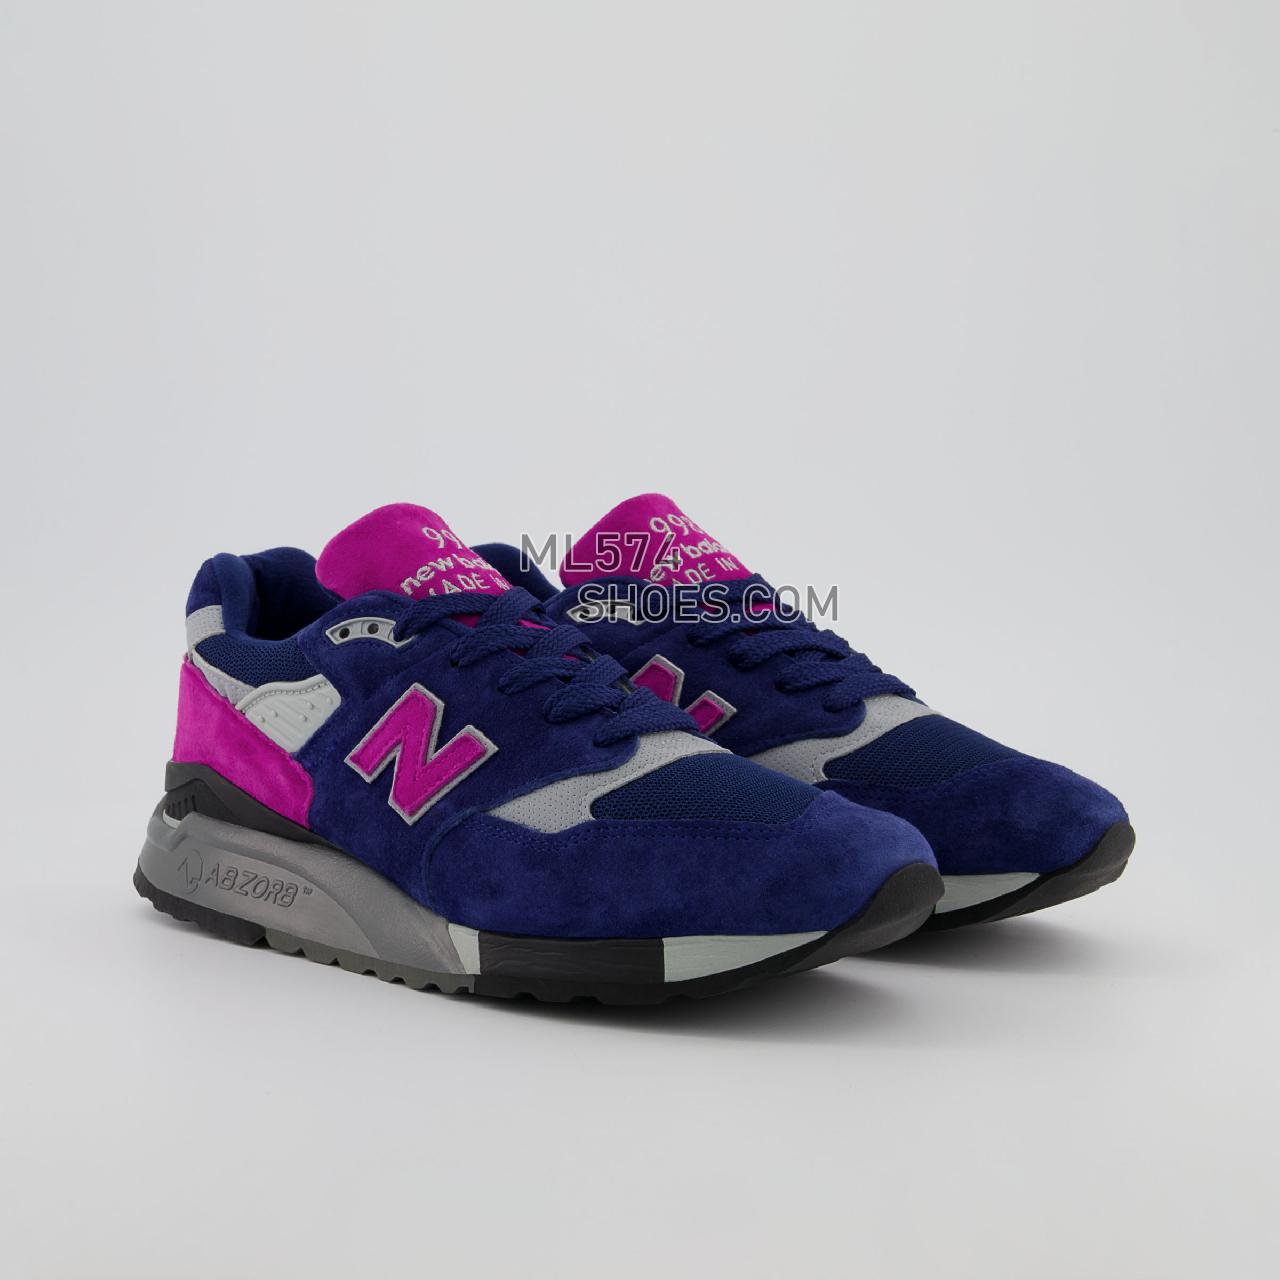 New Balance Made Responsibly 998 - Unisex Men's Women's Made in USA And UK Sneakers - Multi - US998MR